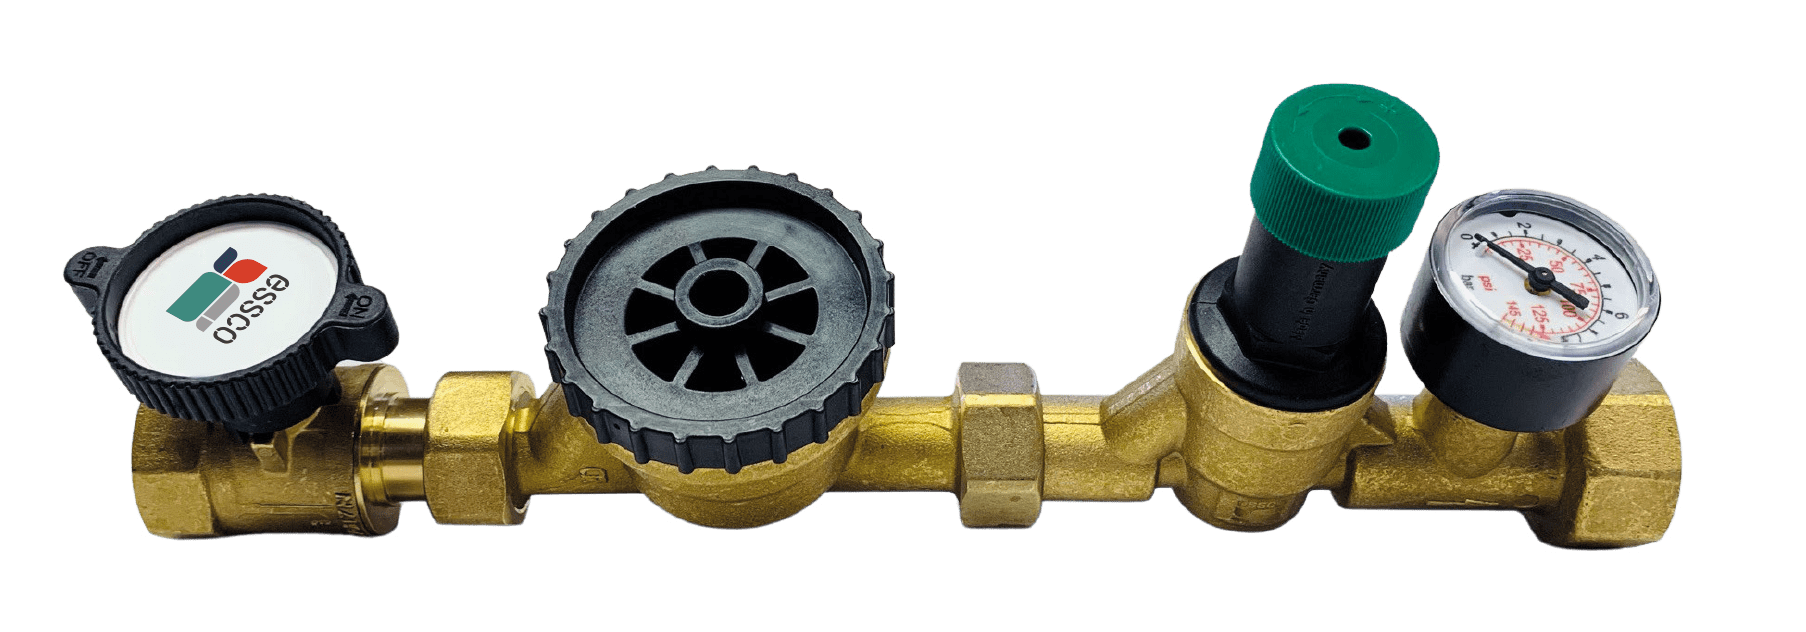 Essco Water meter assembly